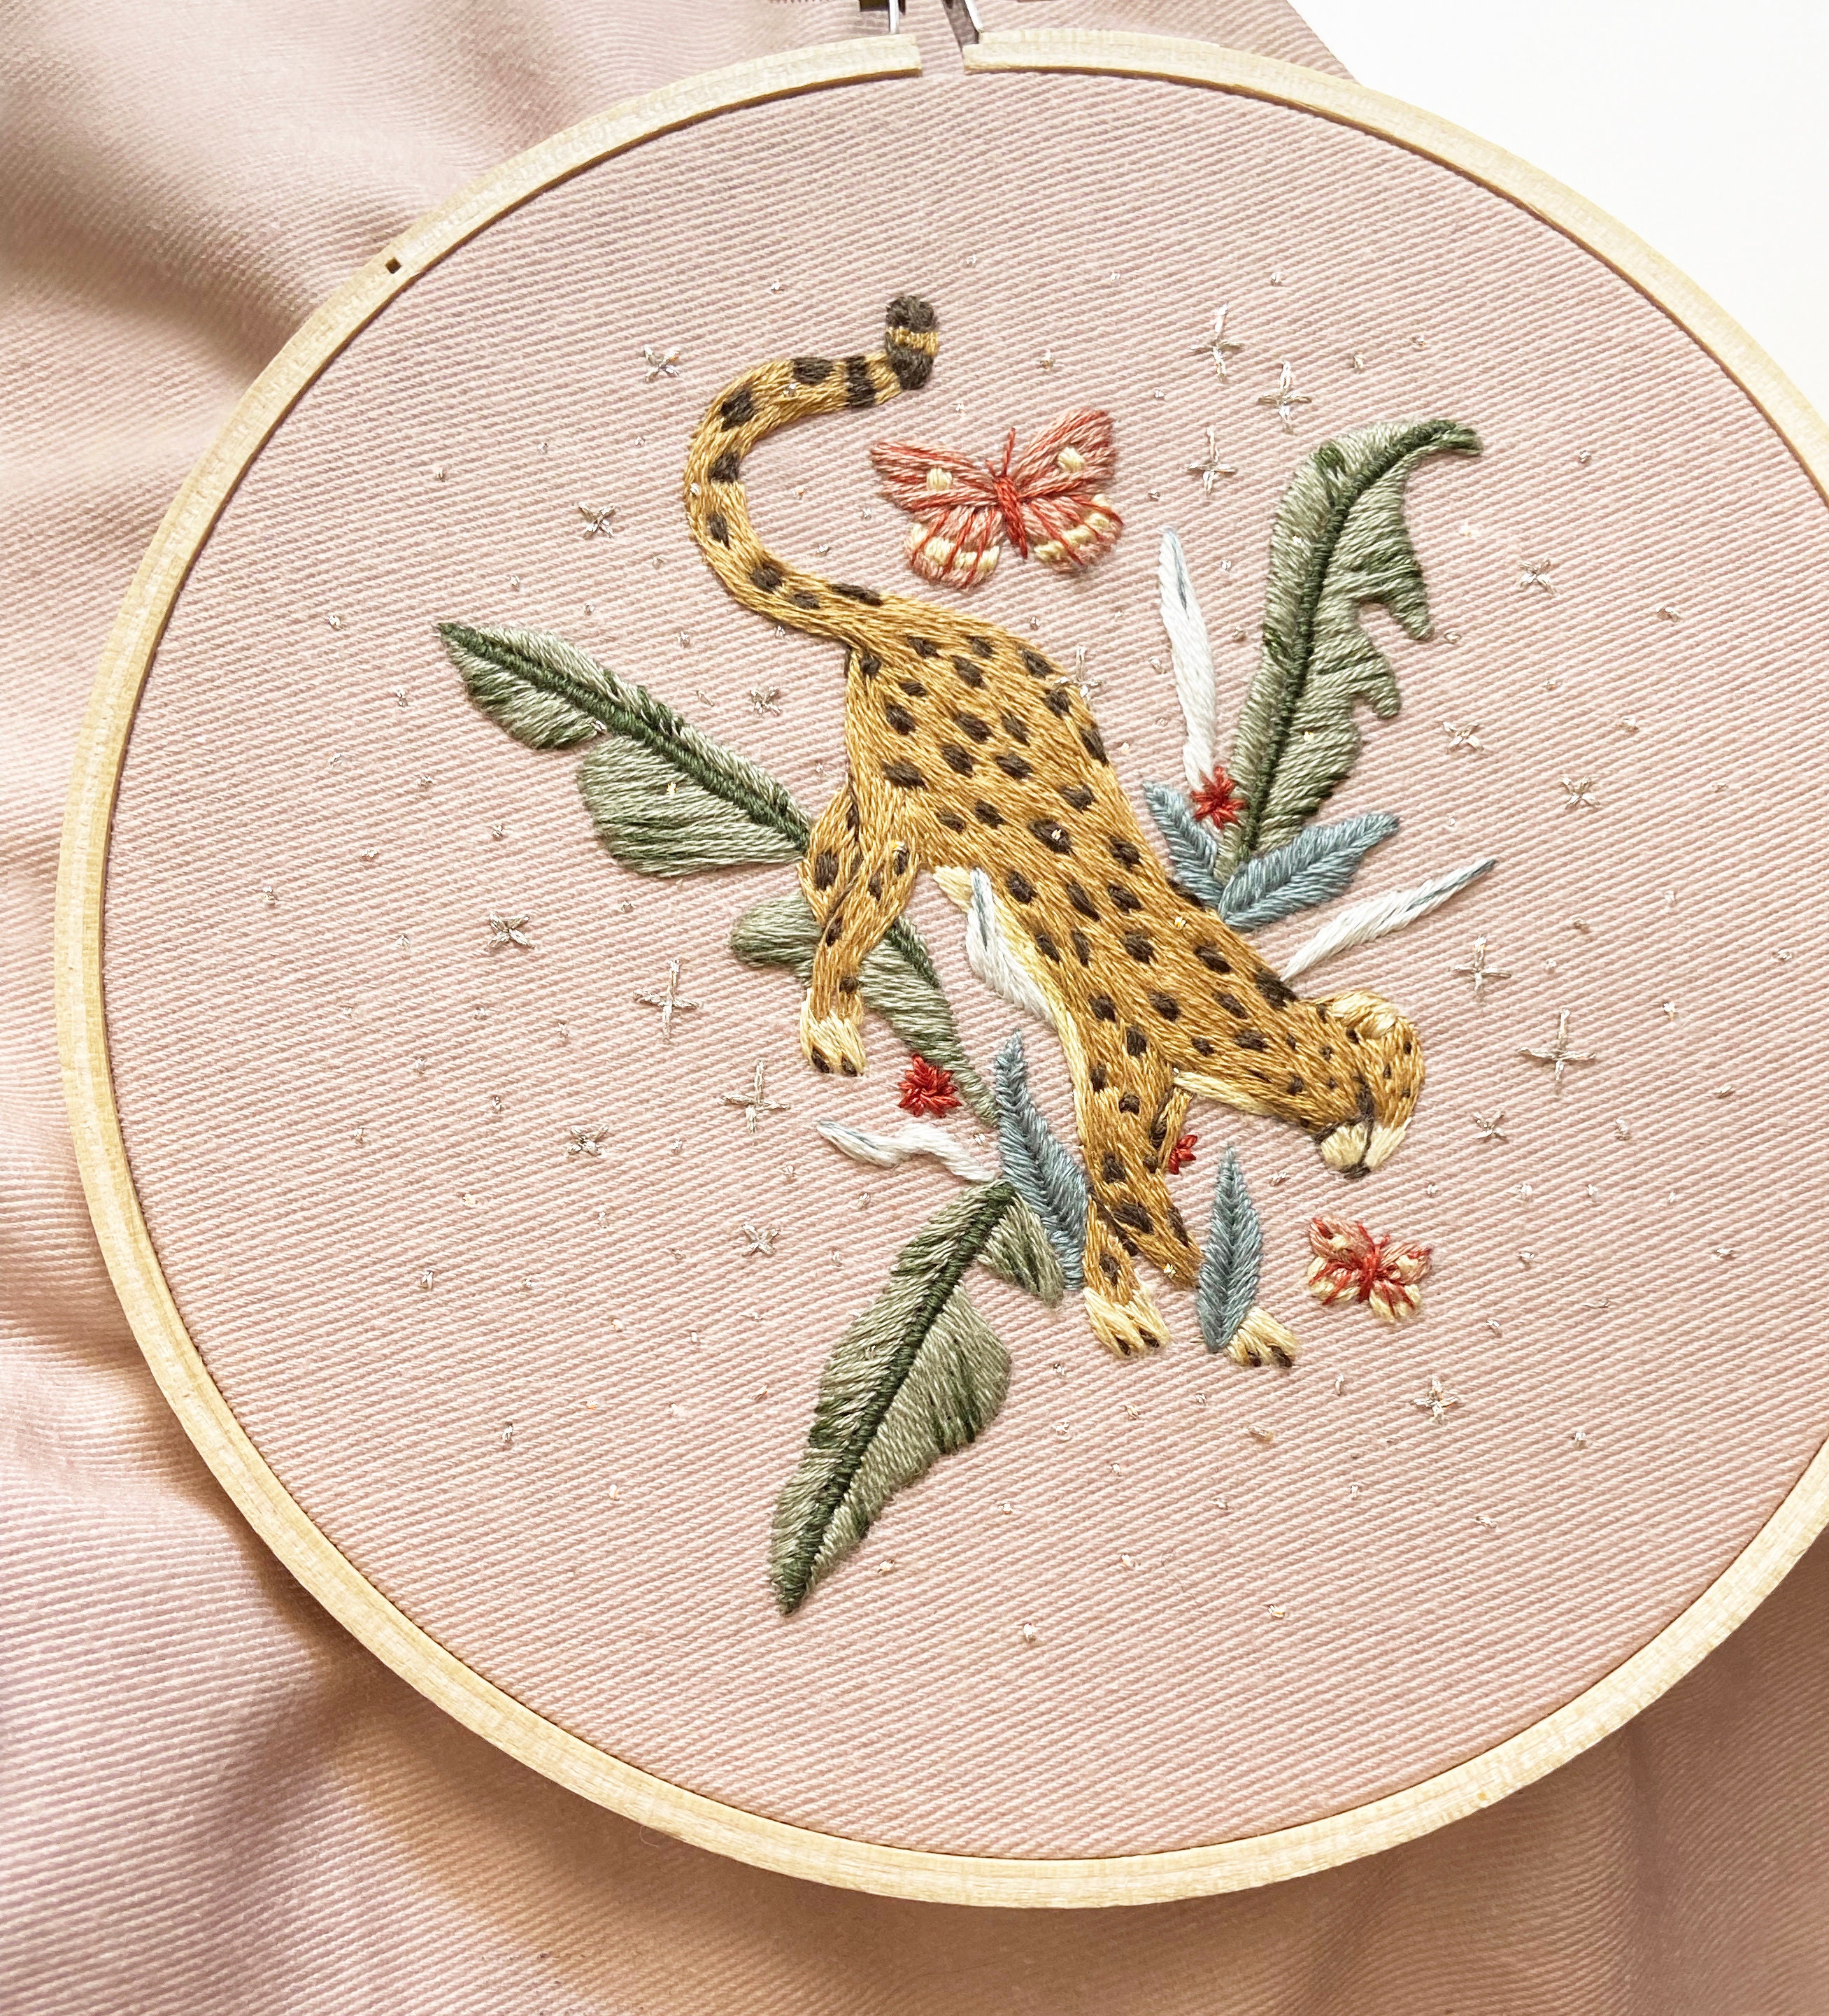 Cheetah Jungle Hand Embroidery Pattern Beginner Embroidery - Etsy